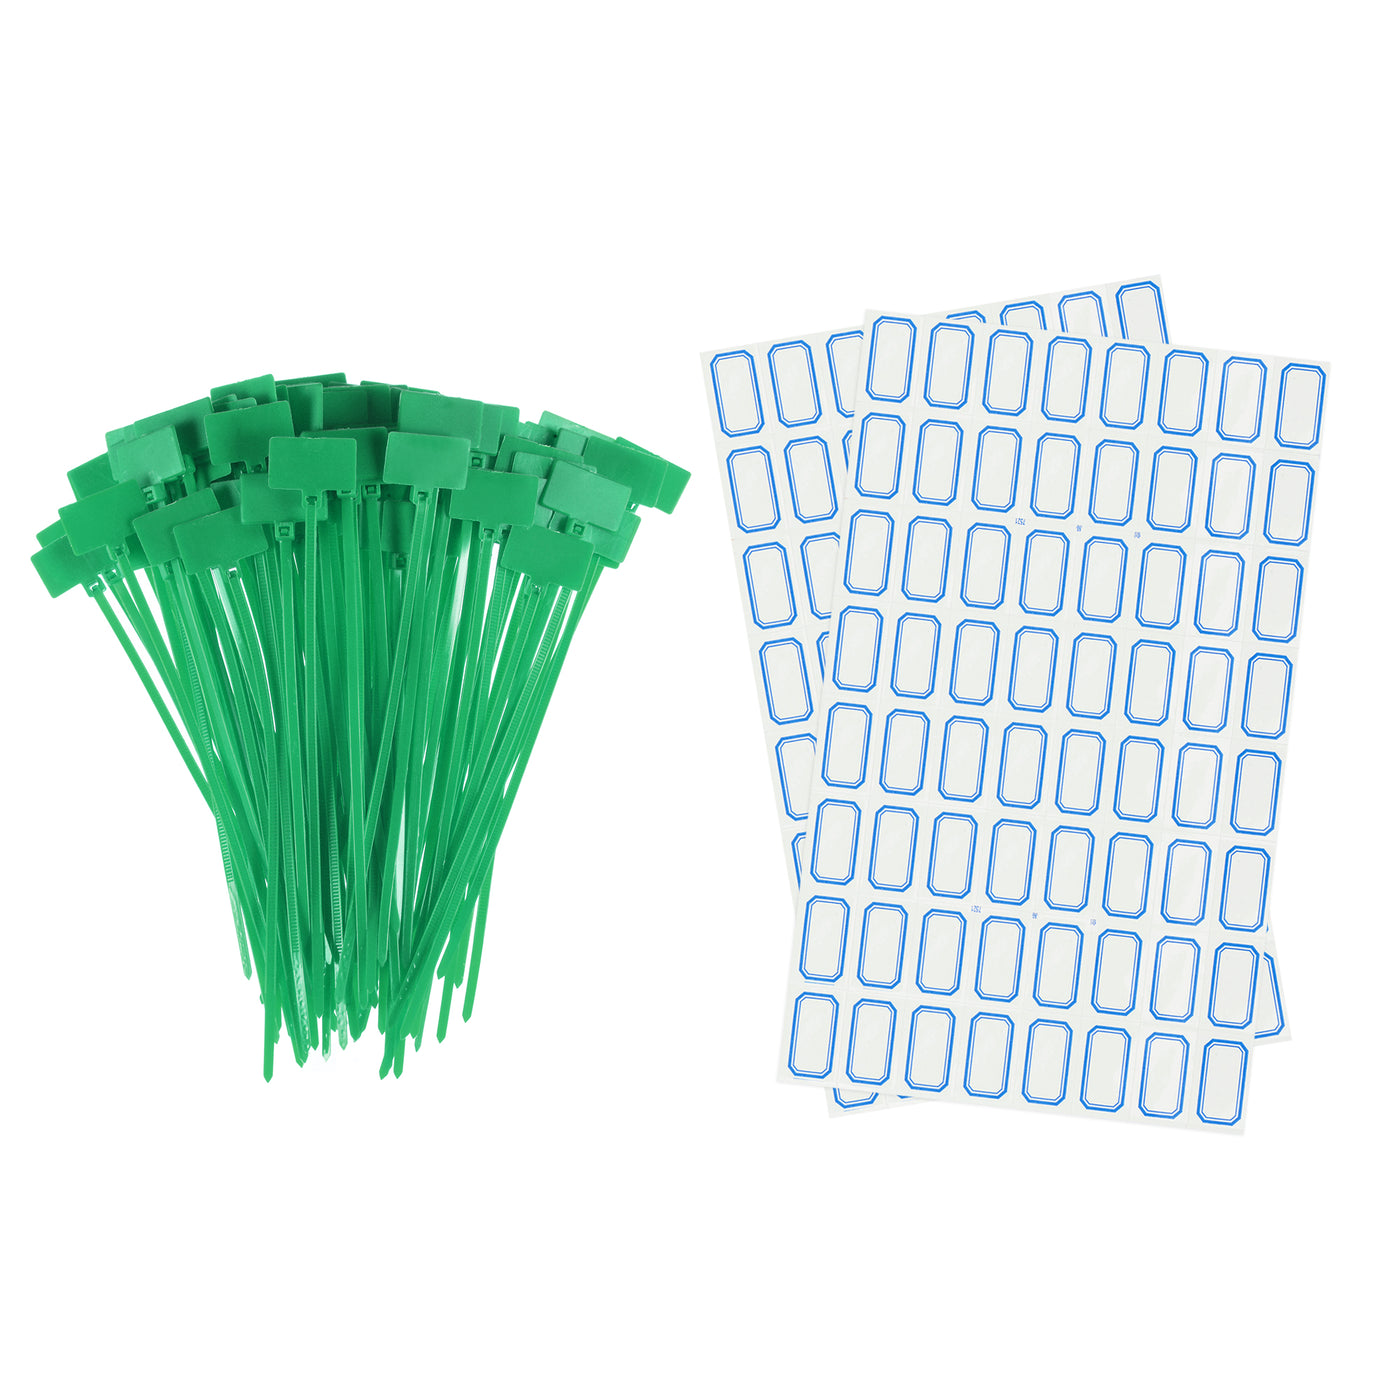 uxcell Uxcell 100pcs Nylon Cable Ties Tags Label Marker Self-Locking for Marking Organizing Green